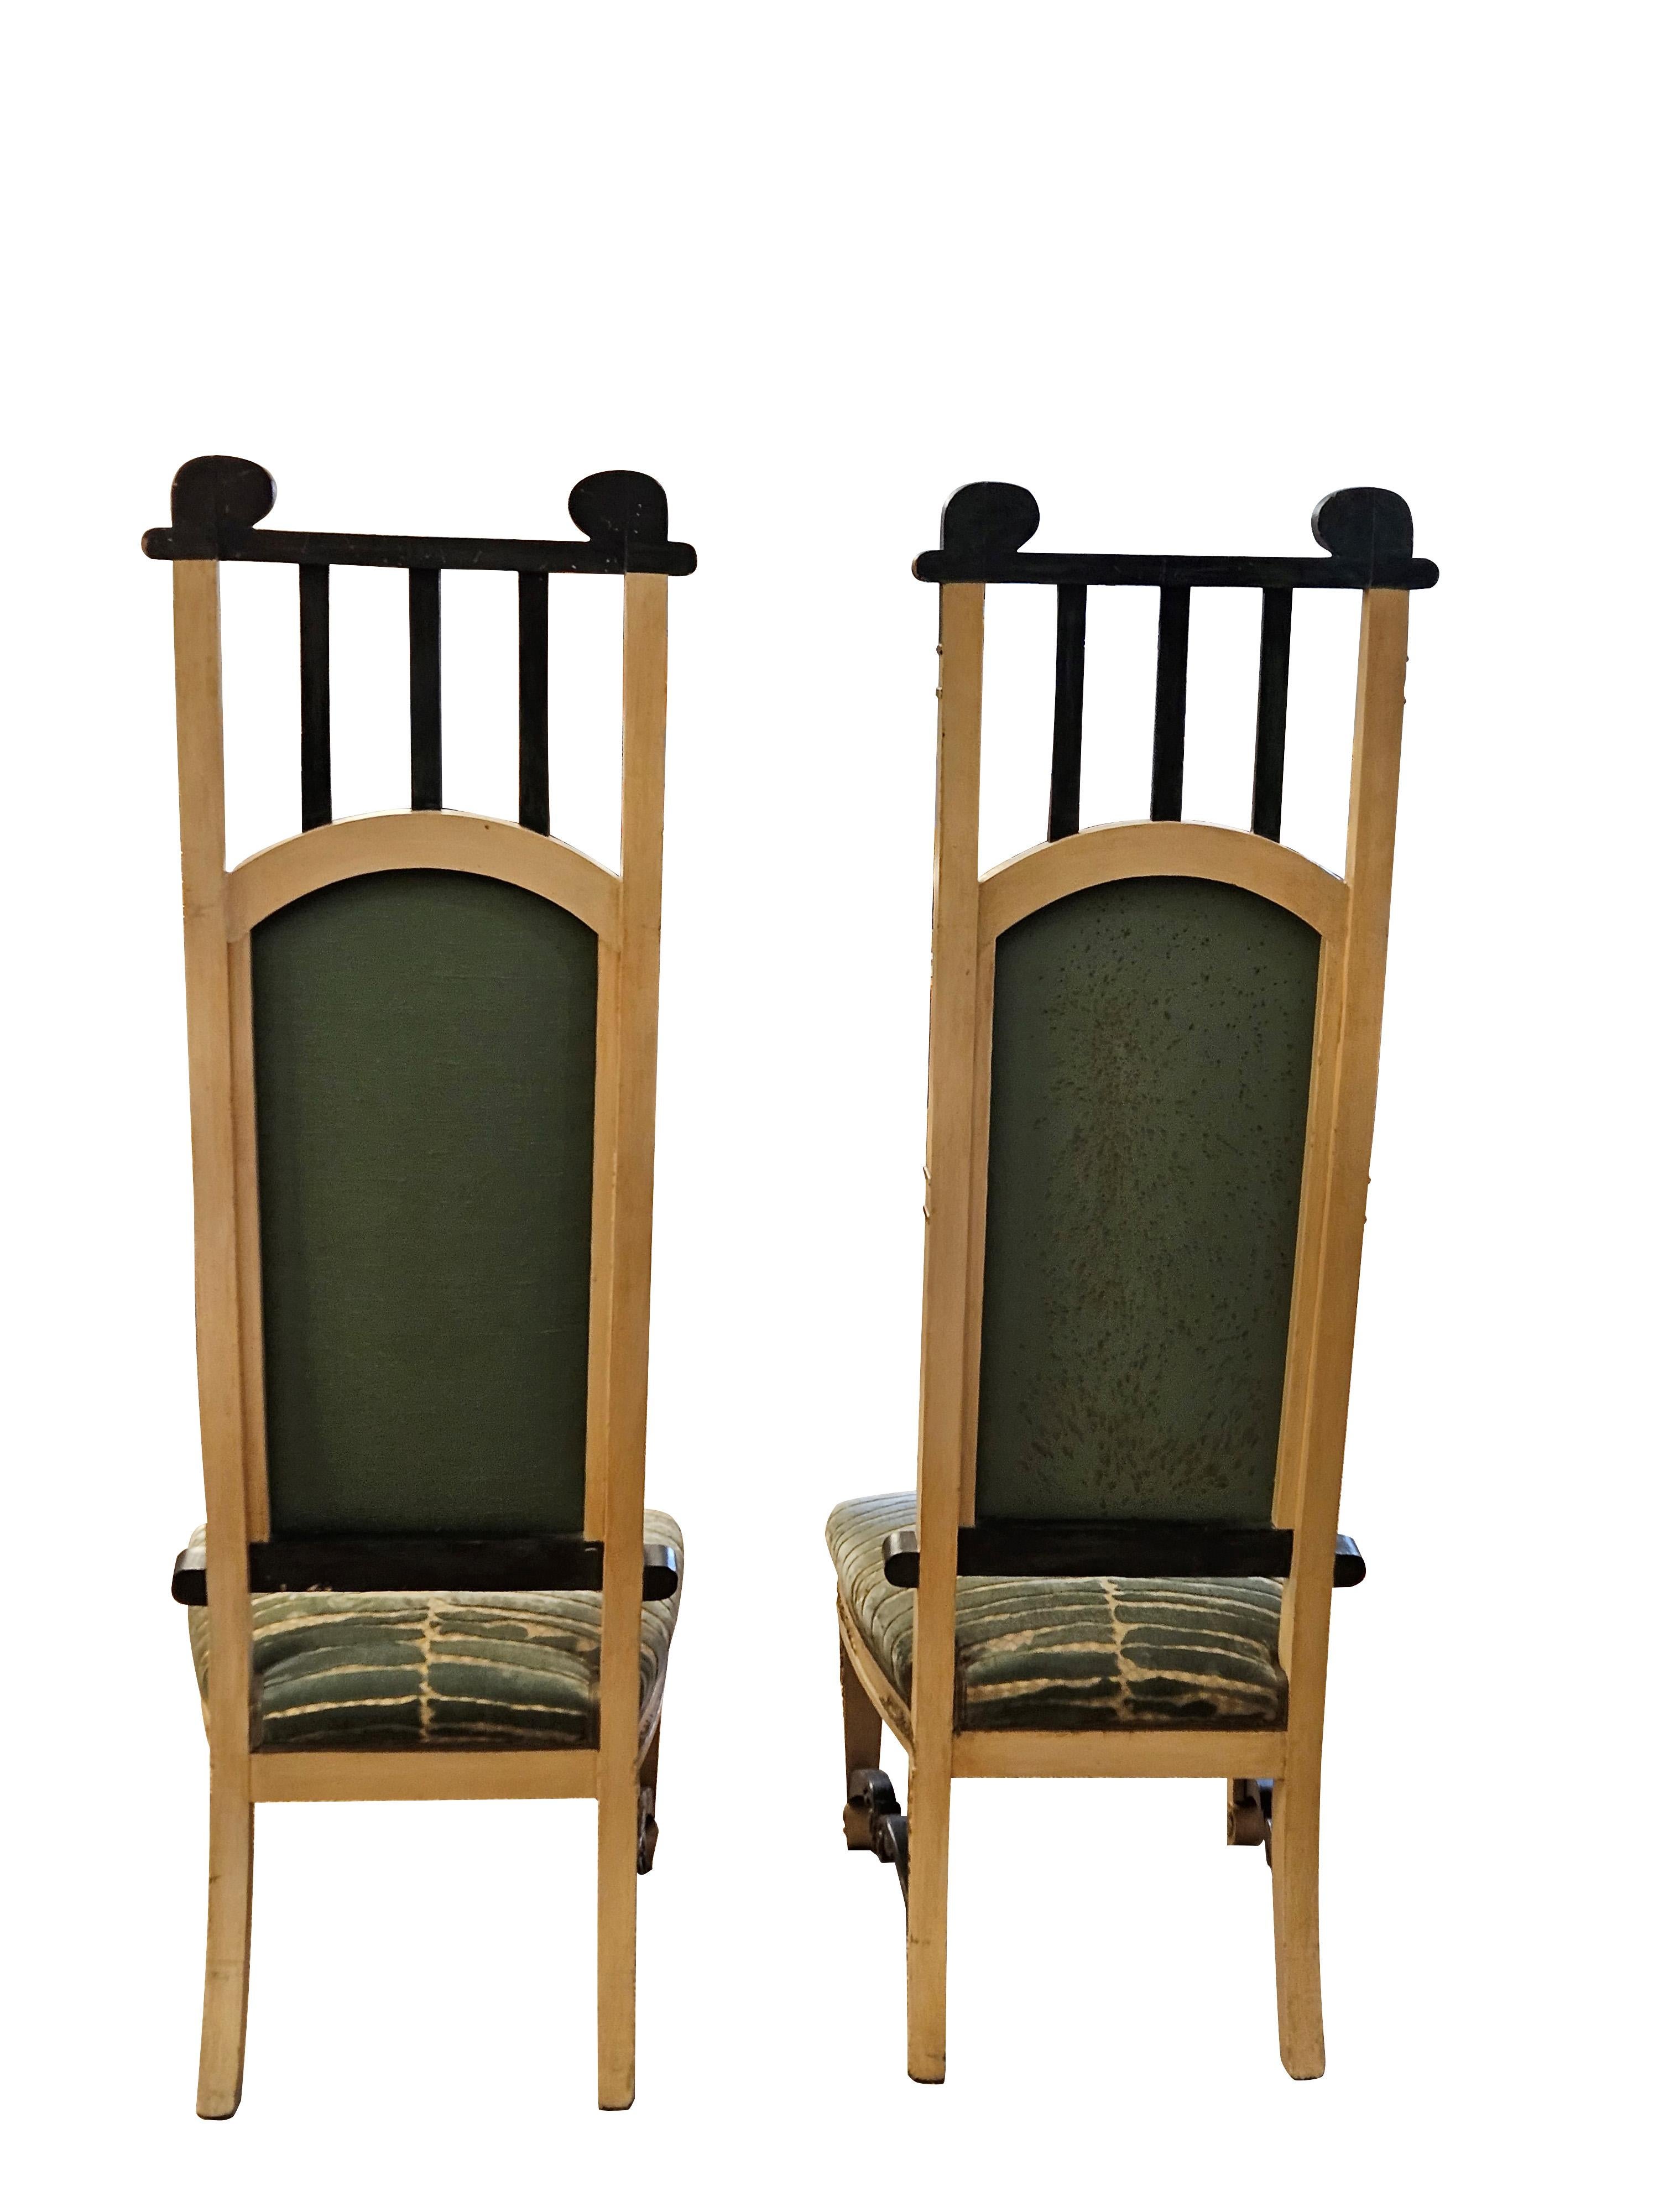 Vienna Secession Pair of low chairs in the Viennese Secession style For Sale